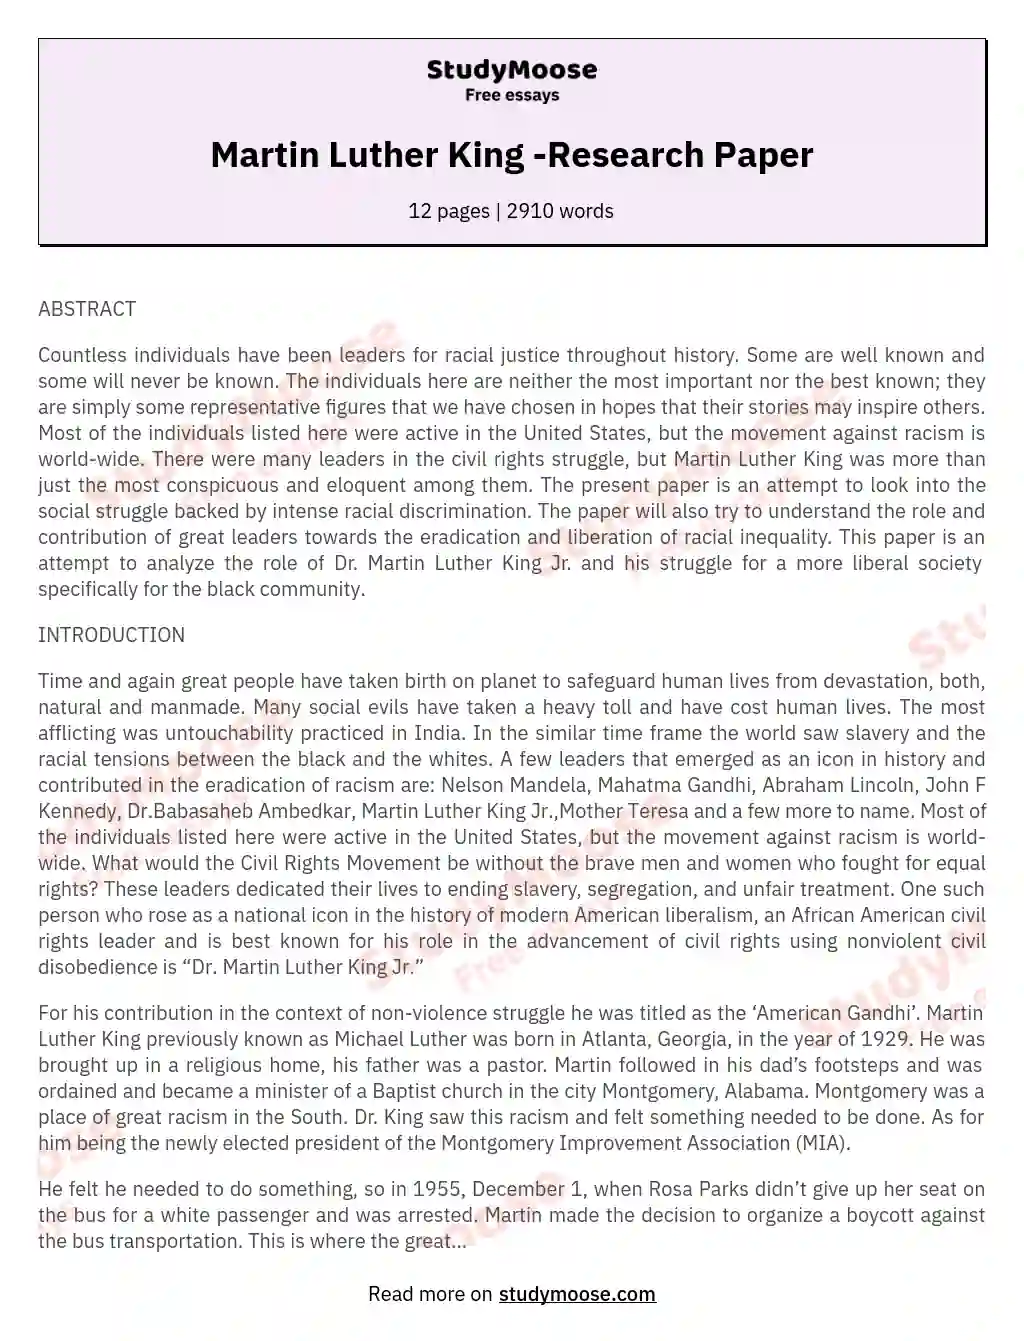 Martin Luther King -Research Paper essay